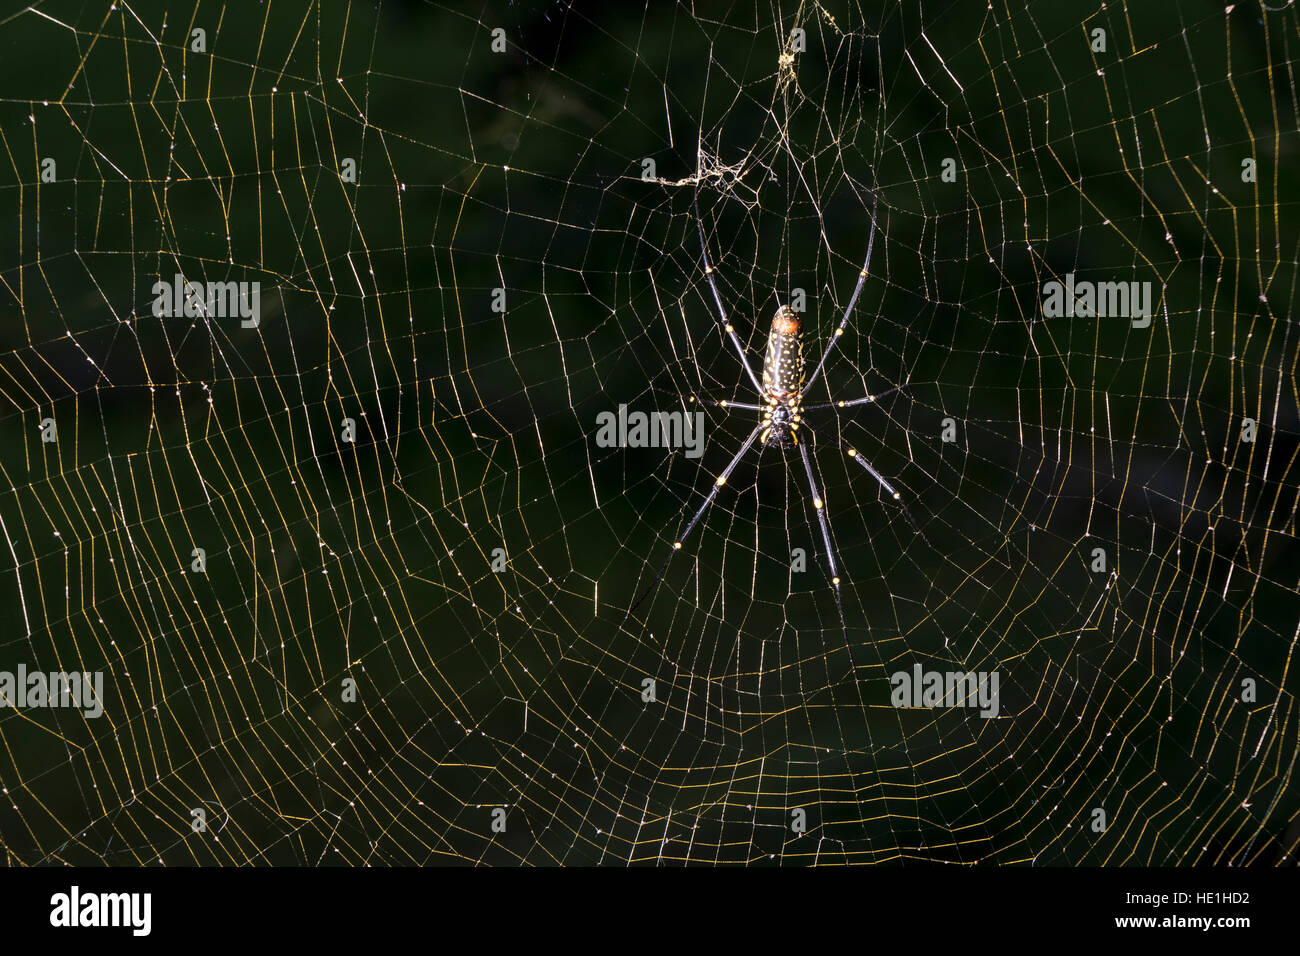 A Golden Silk Orb-Weavers (Nephila), a big spider, hanging in its spider web Stock Photo